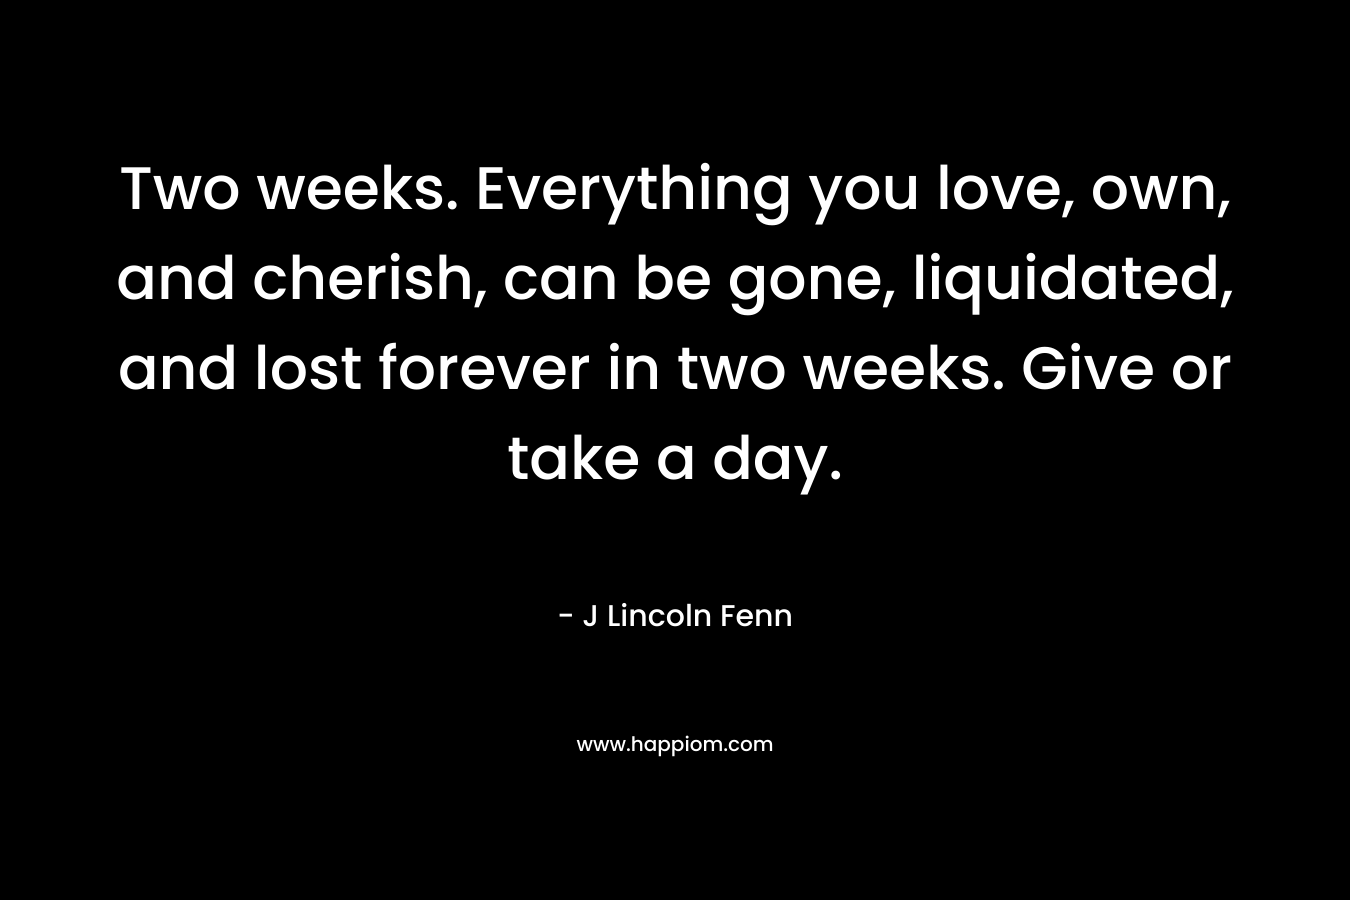 Two weeks. Everything you love, own, and cherish, can be gone, liquidated, and lost forever in two weeks. Give or take a day. – J Lincoln Fenn